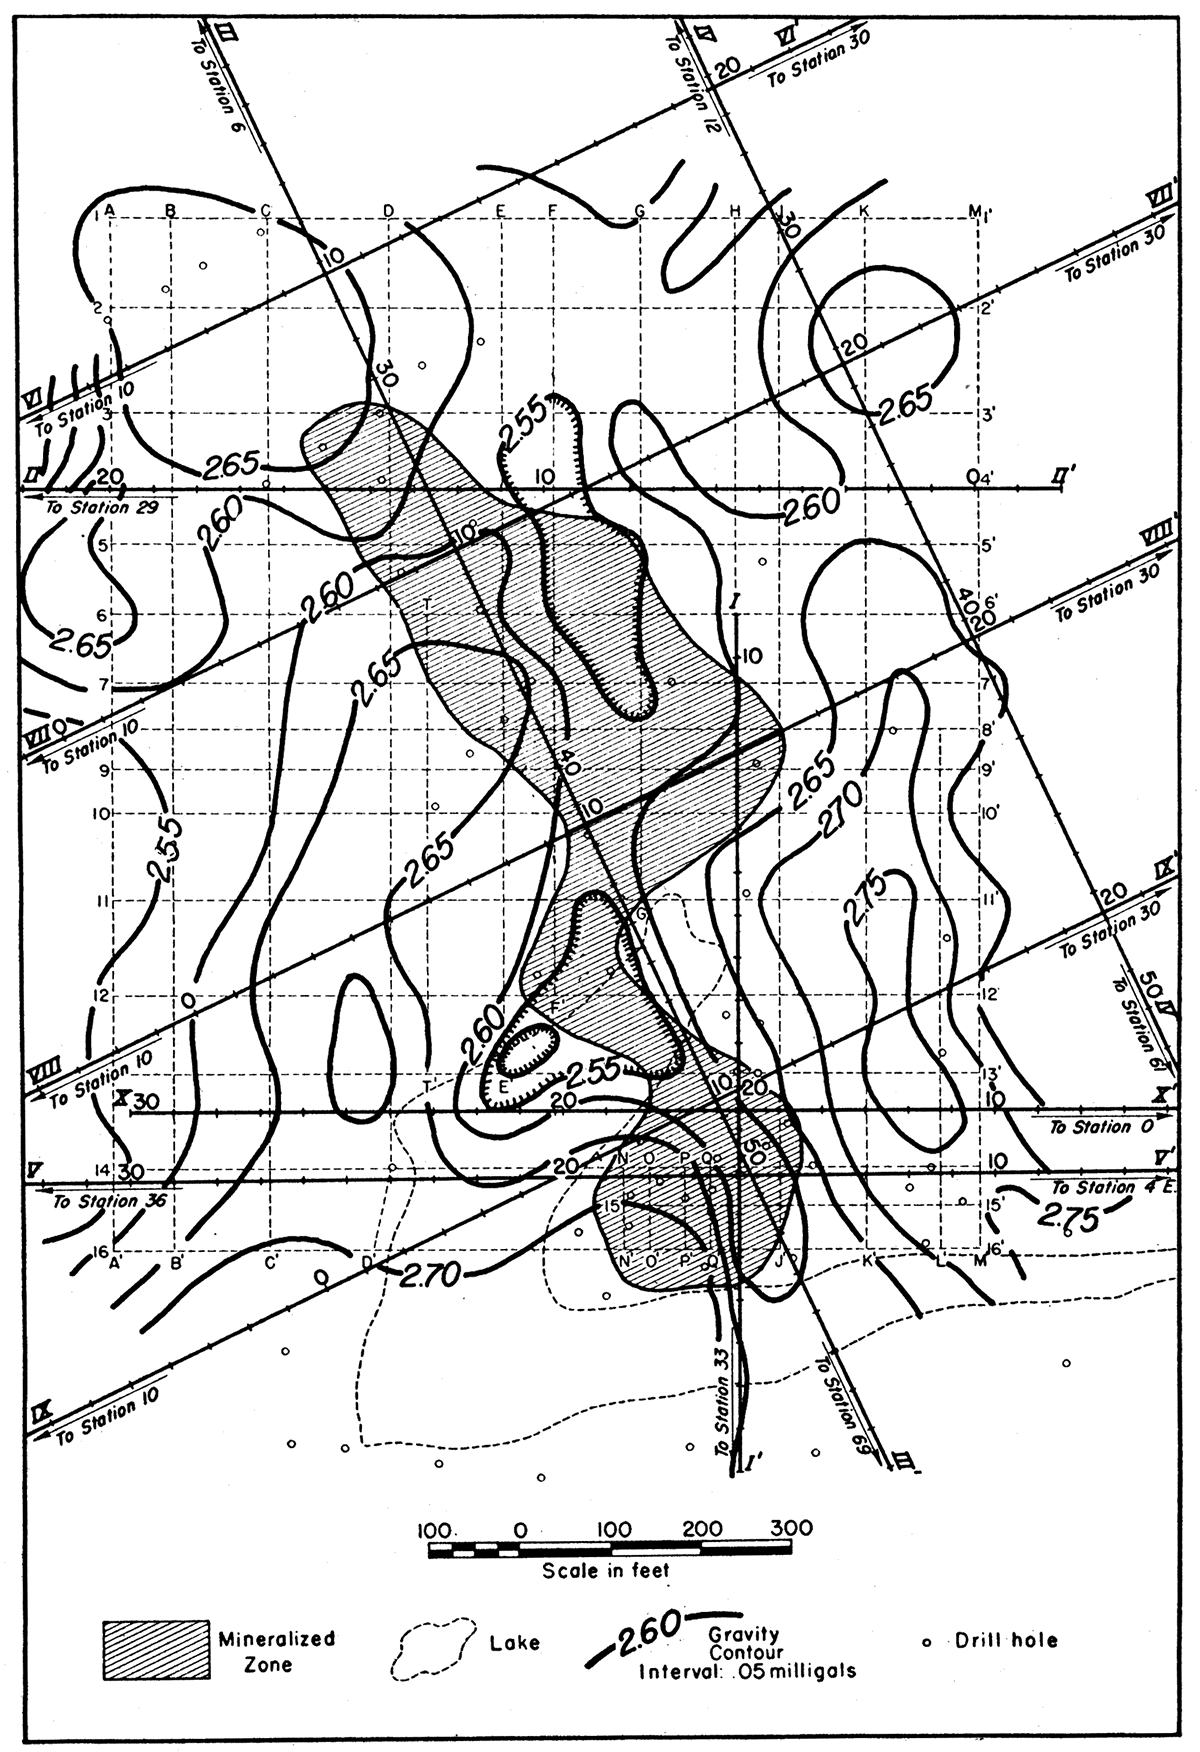 Map showing gravity contours in the Walton area.